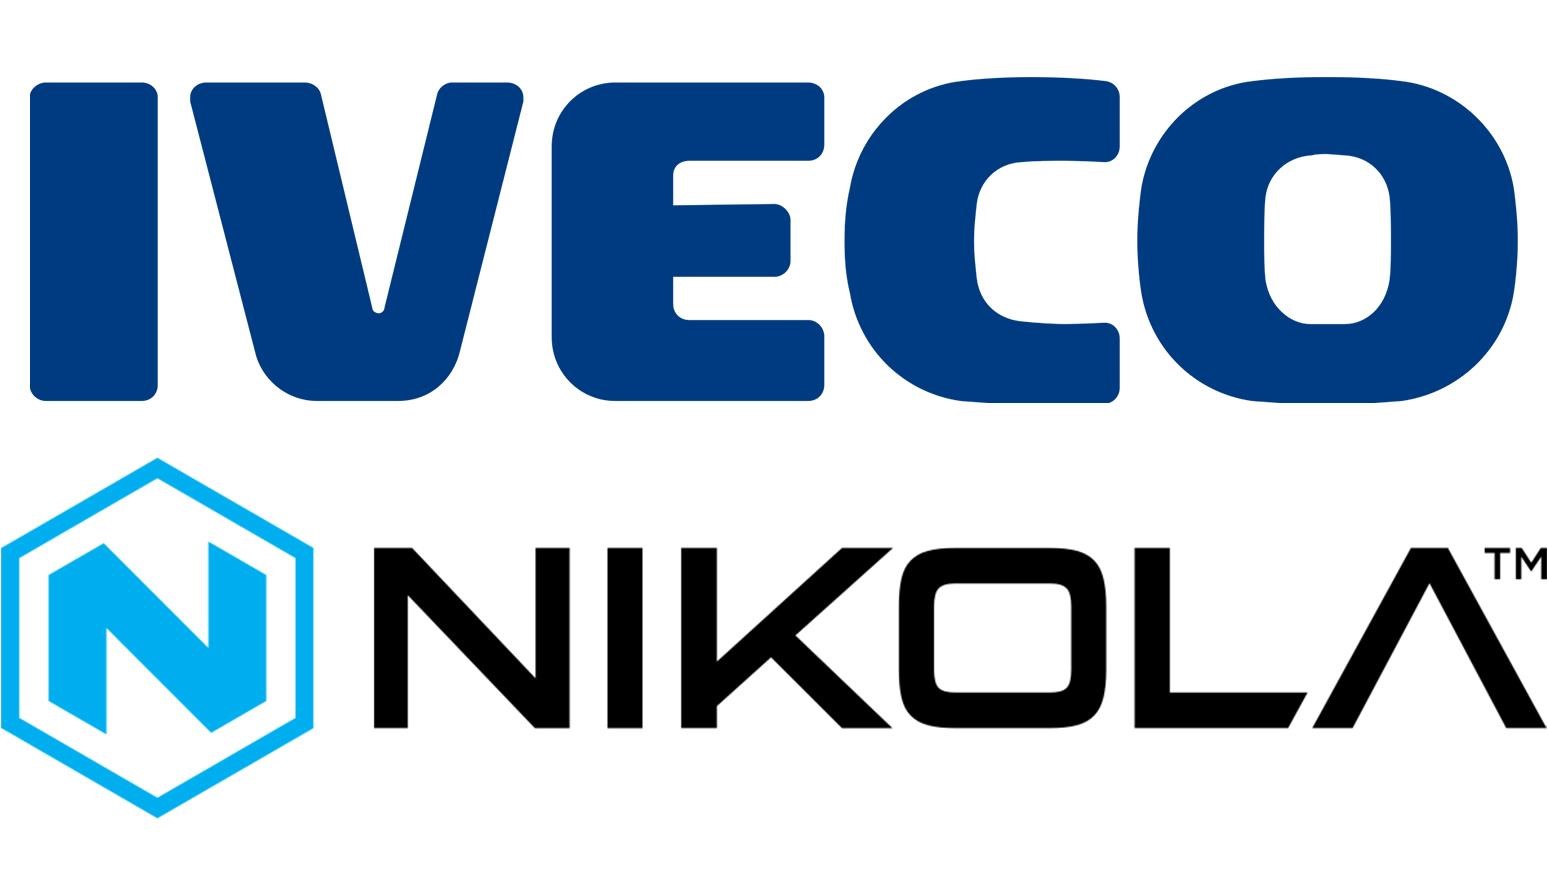 IVECO & Nikola Sign MoU With Hamburg Port Authority For Zero-Emission Class 8 Battery-Electric Trucks